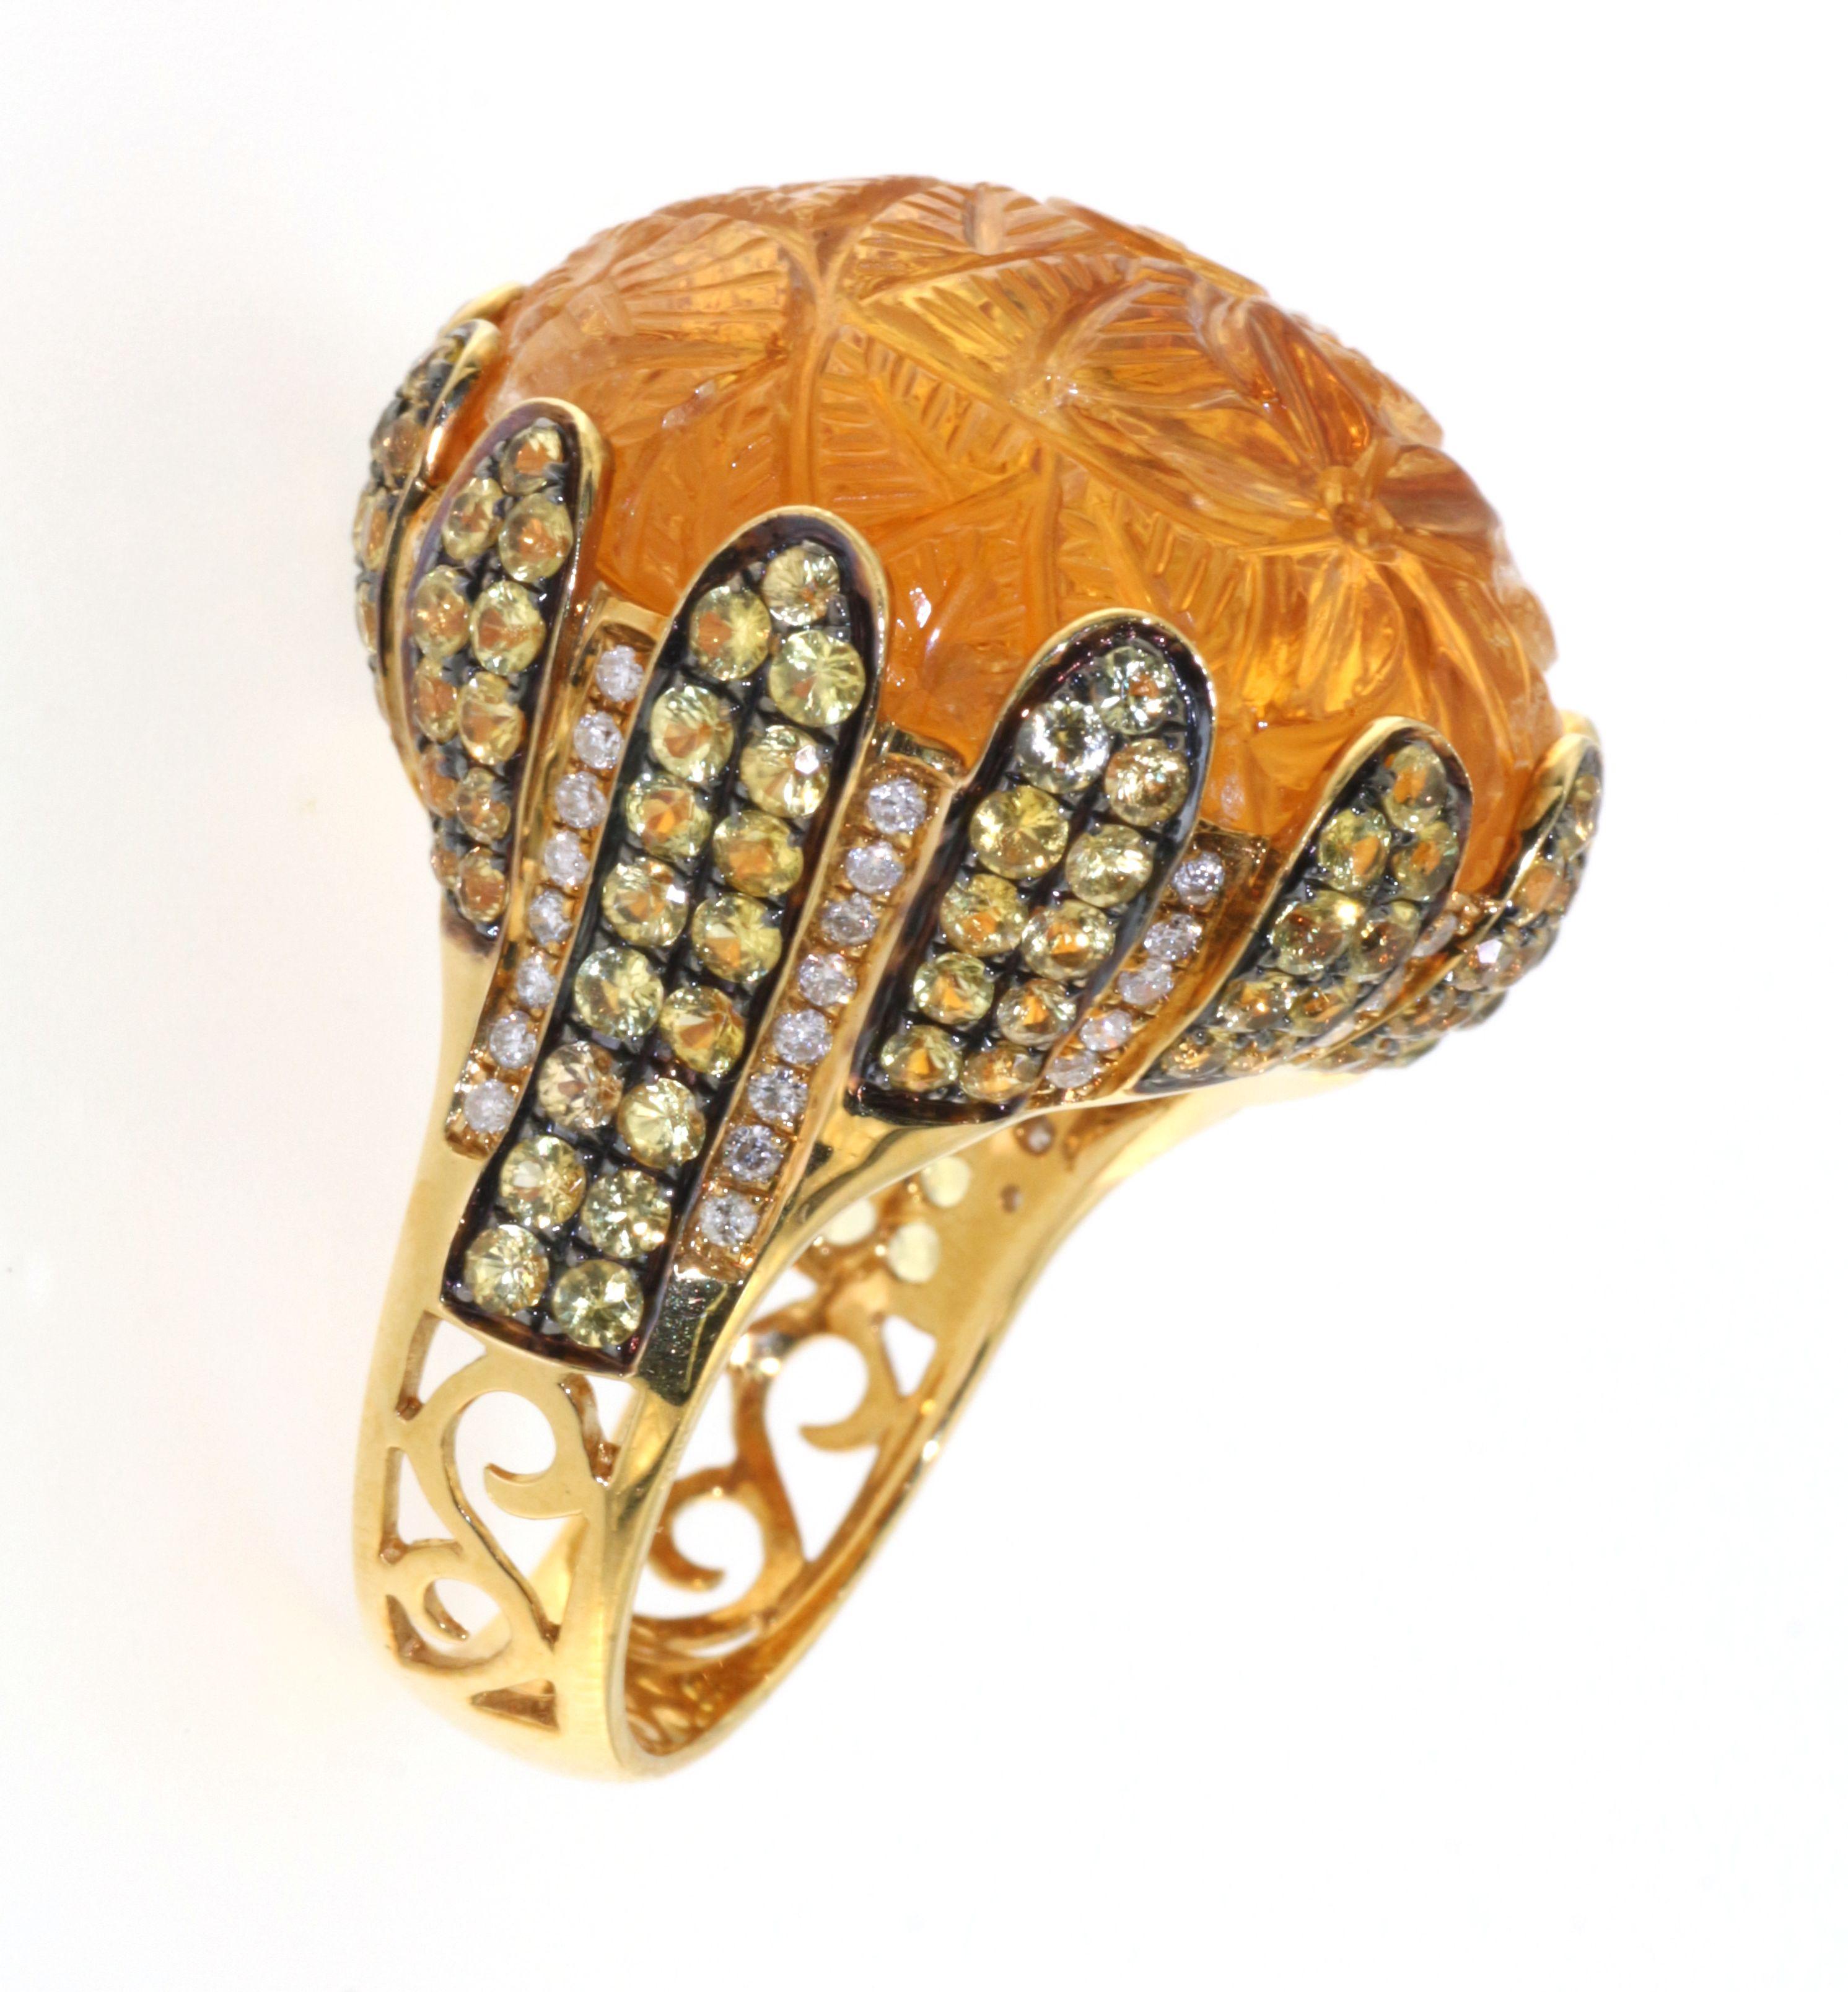 Uncut 46Ct Citrine Yellow Sapphire and Diamond Cocktail Ring in 18kt Yellow Gold